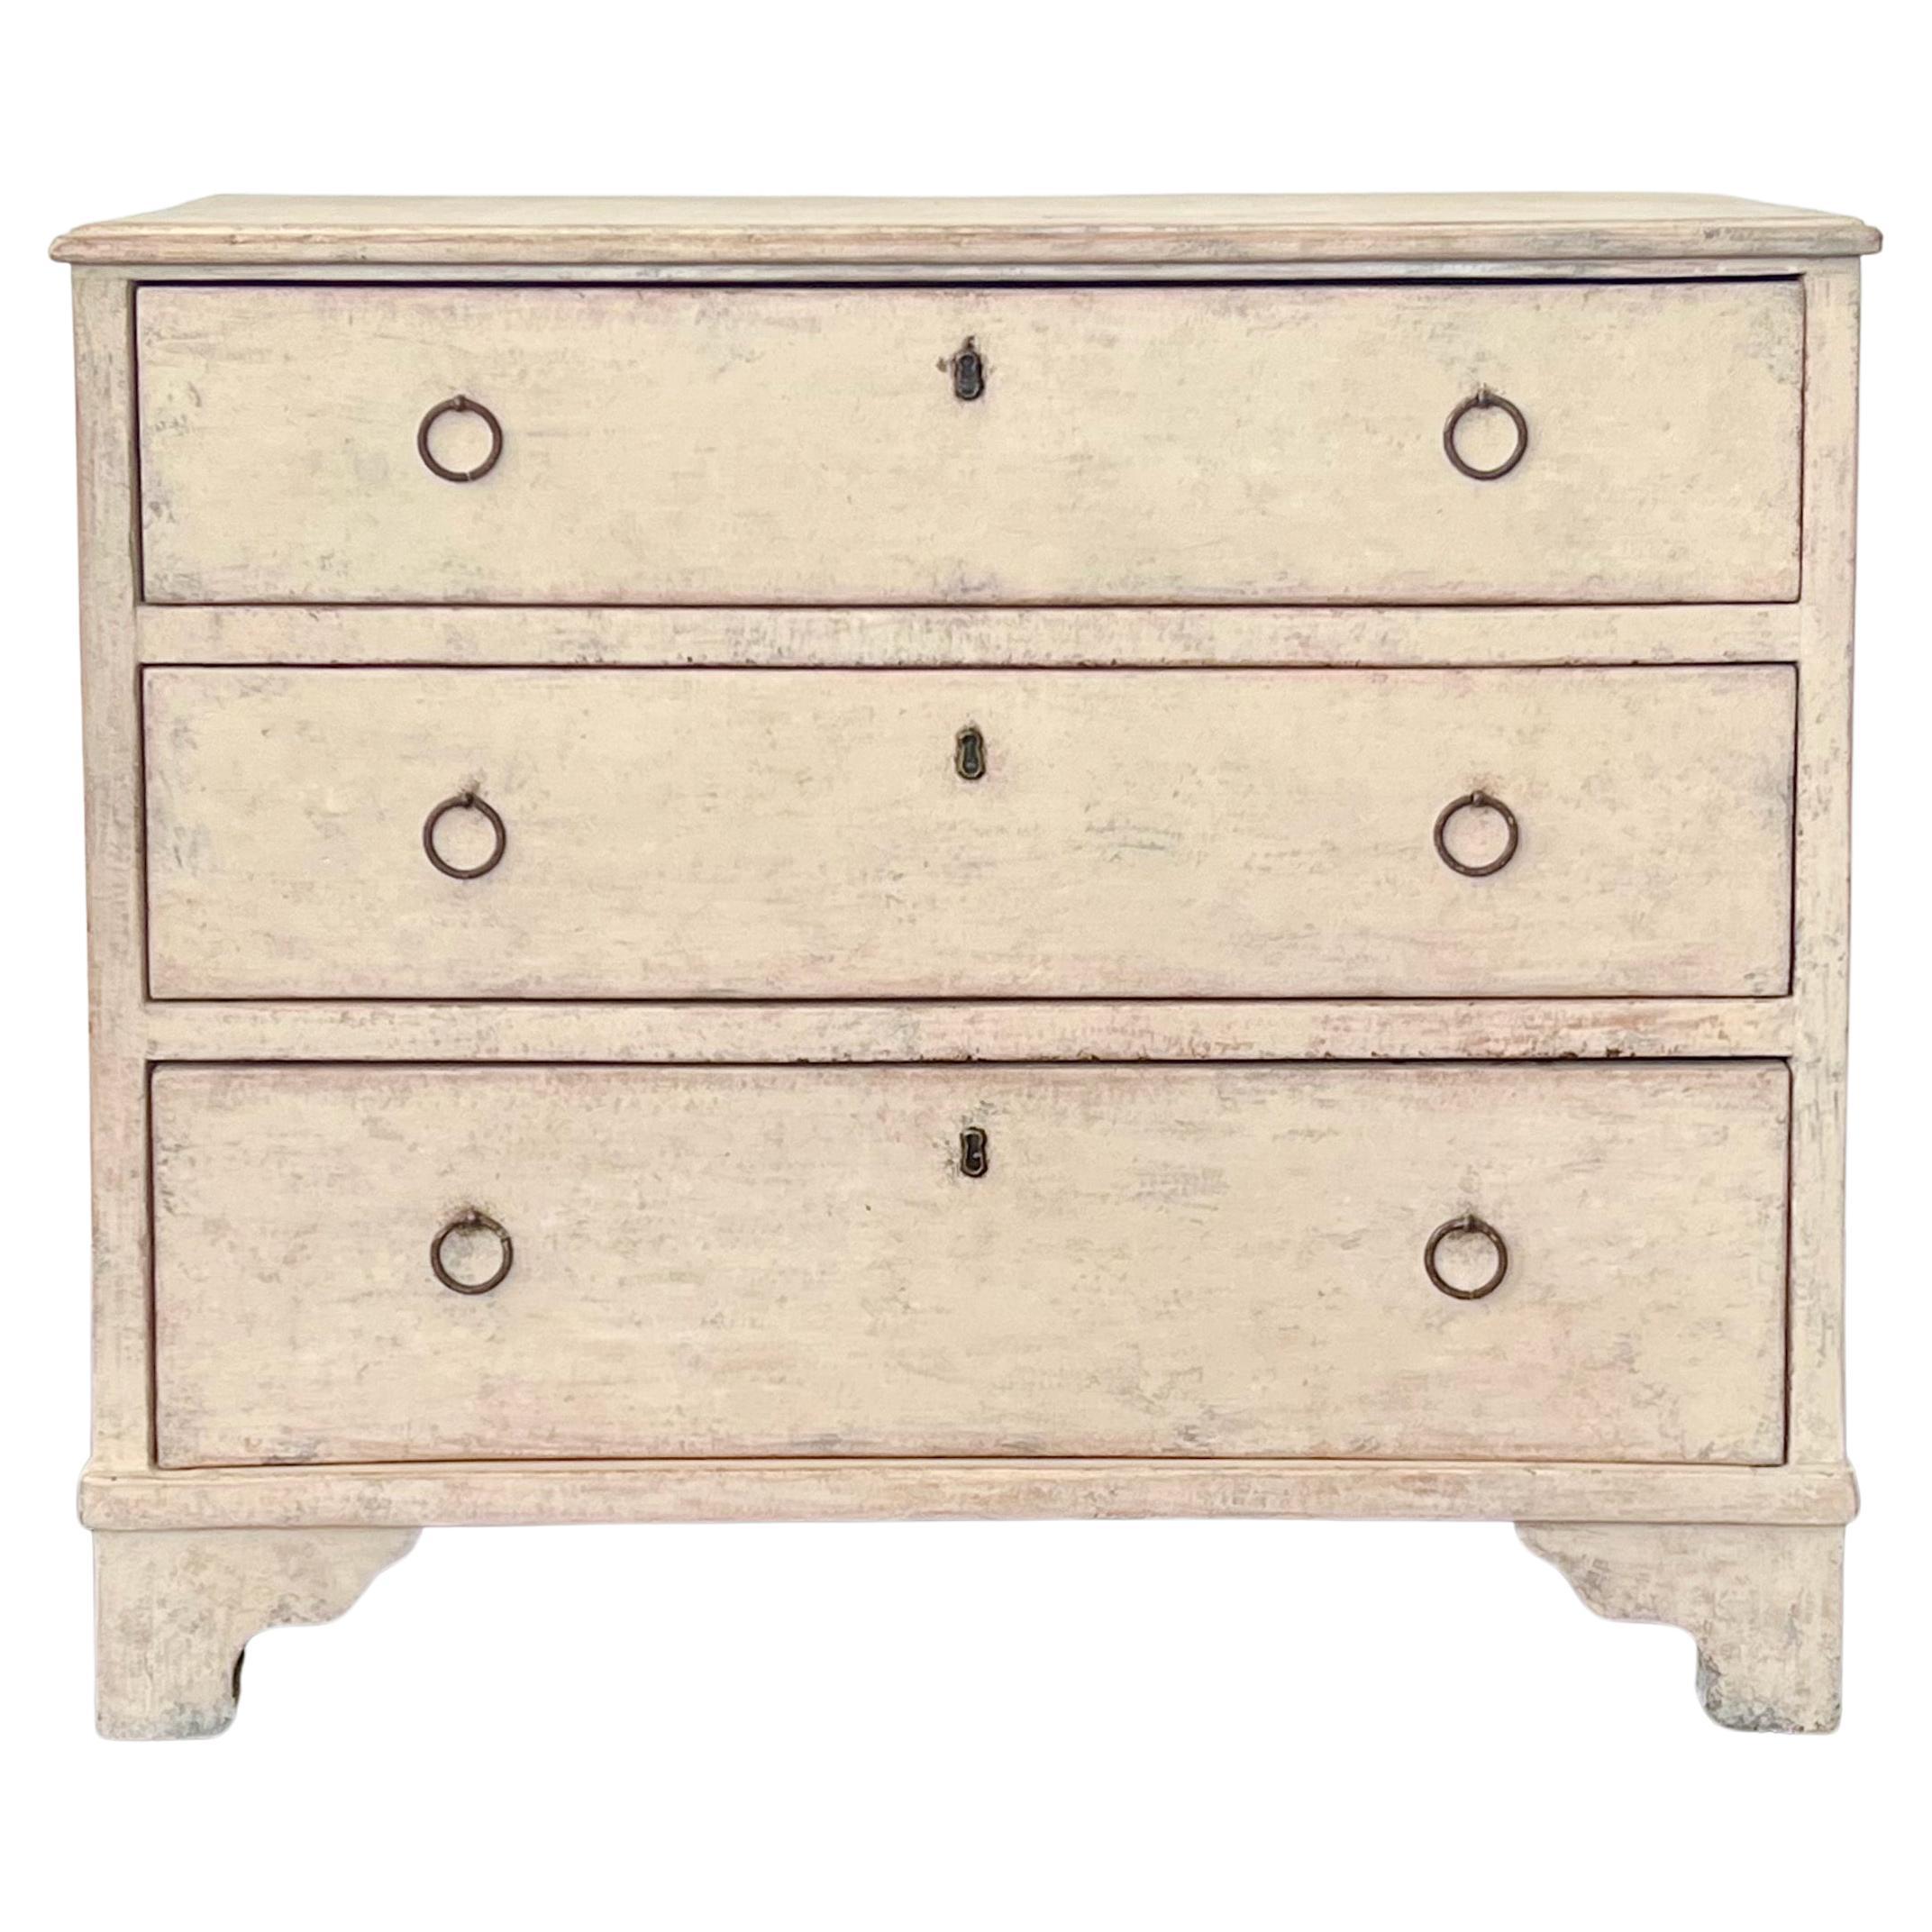 19th Century Swedish Small Chest of Drawers